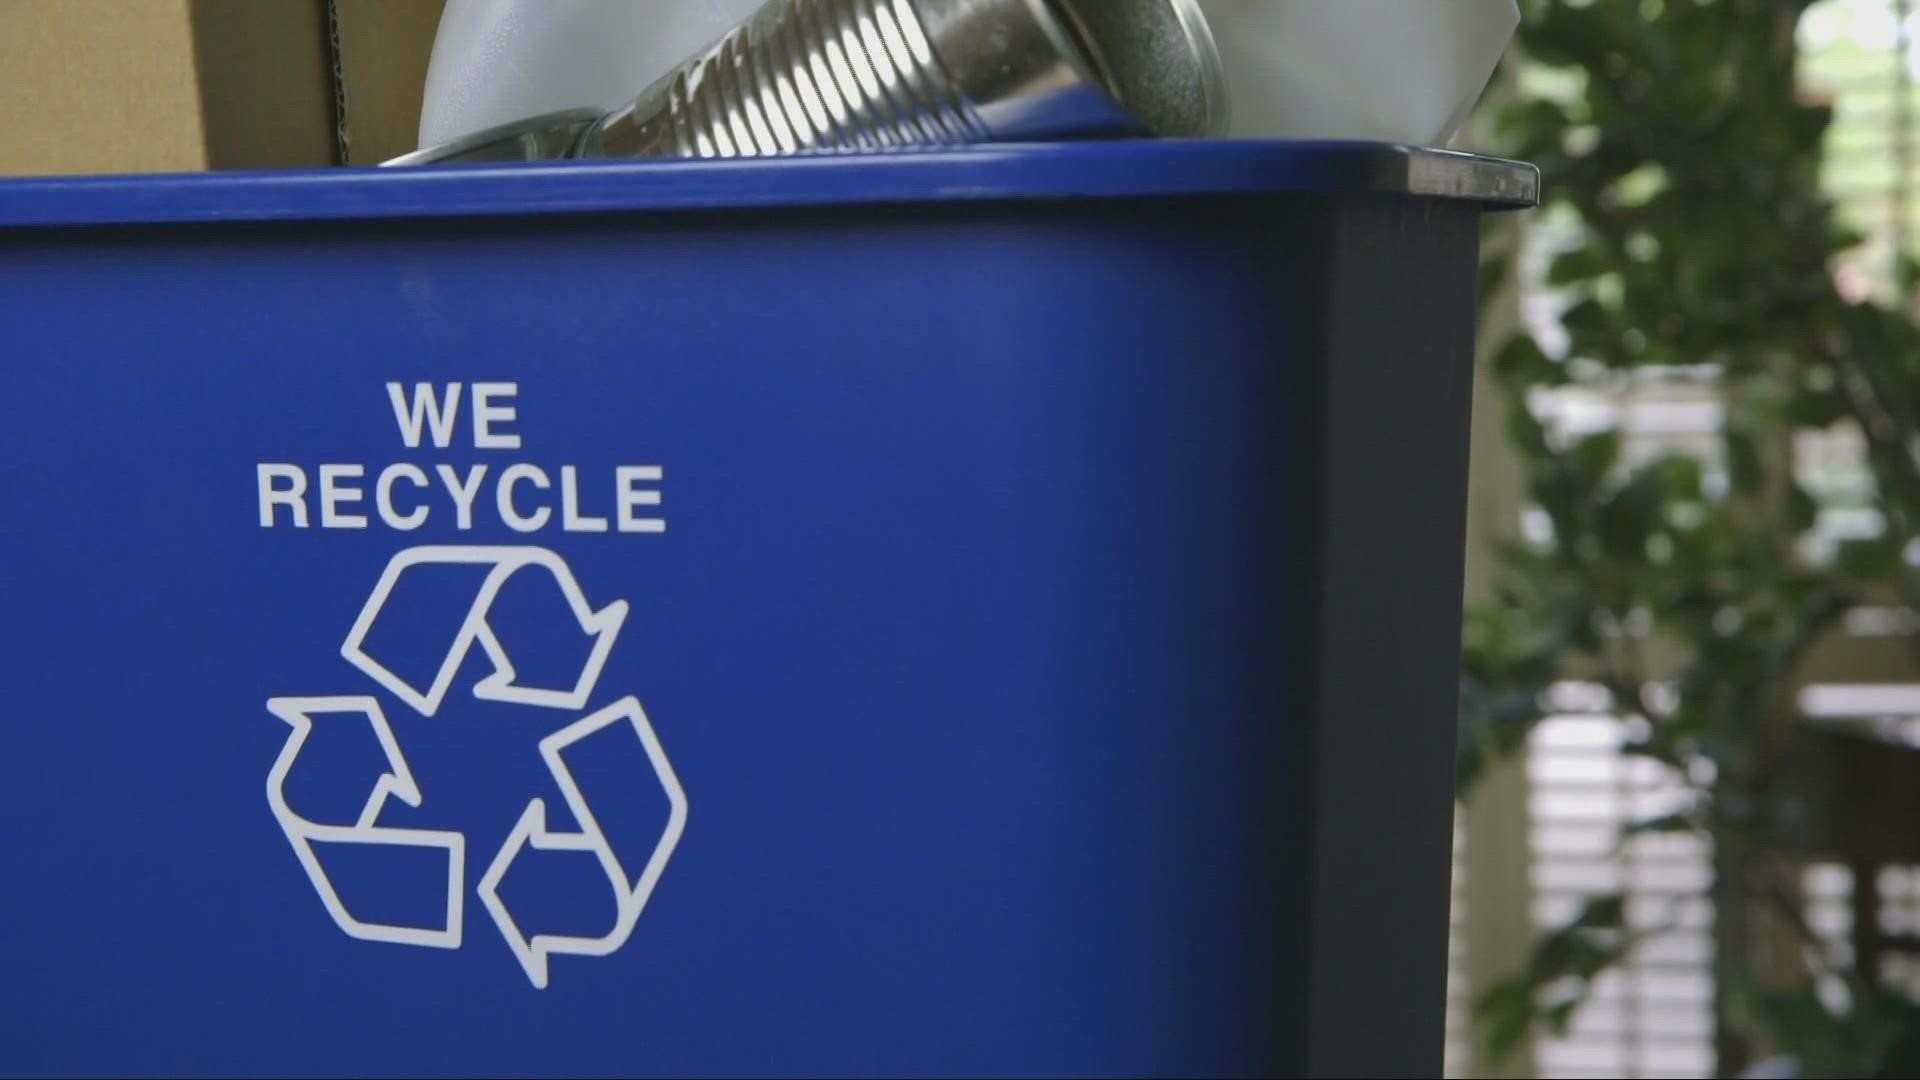 One Cleveland suburb is experimenting with an ambitious recycling project that sent students to homes to inspect recycling habits. Mike Polk Jr. reports.